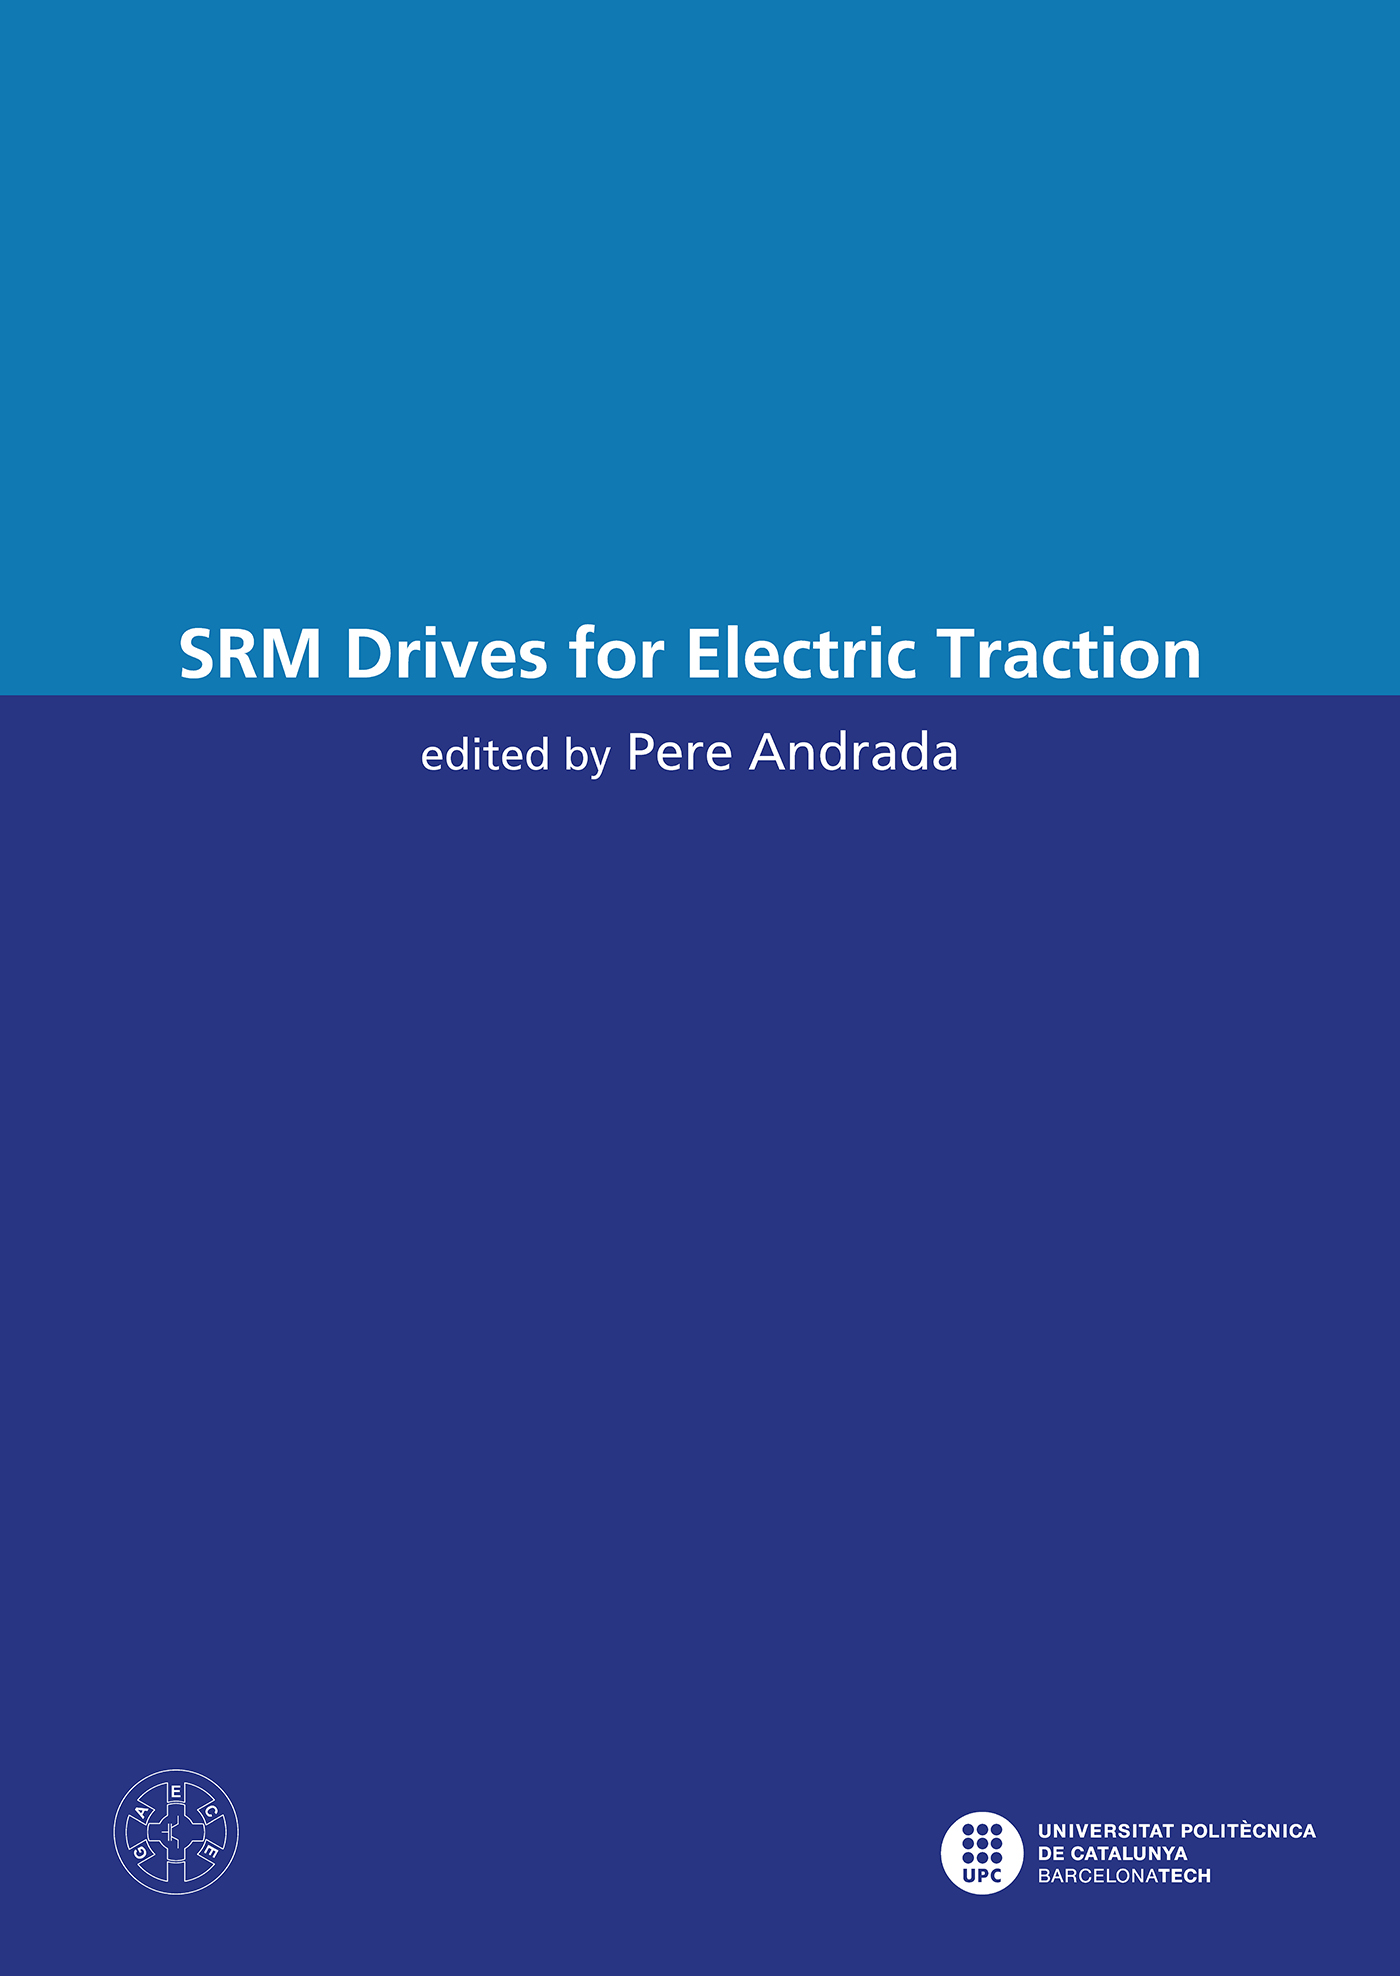 SRM Drives for Electric Traction